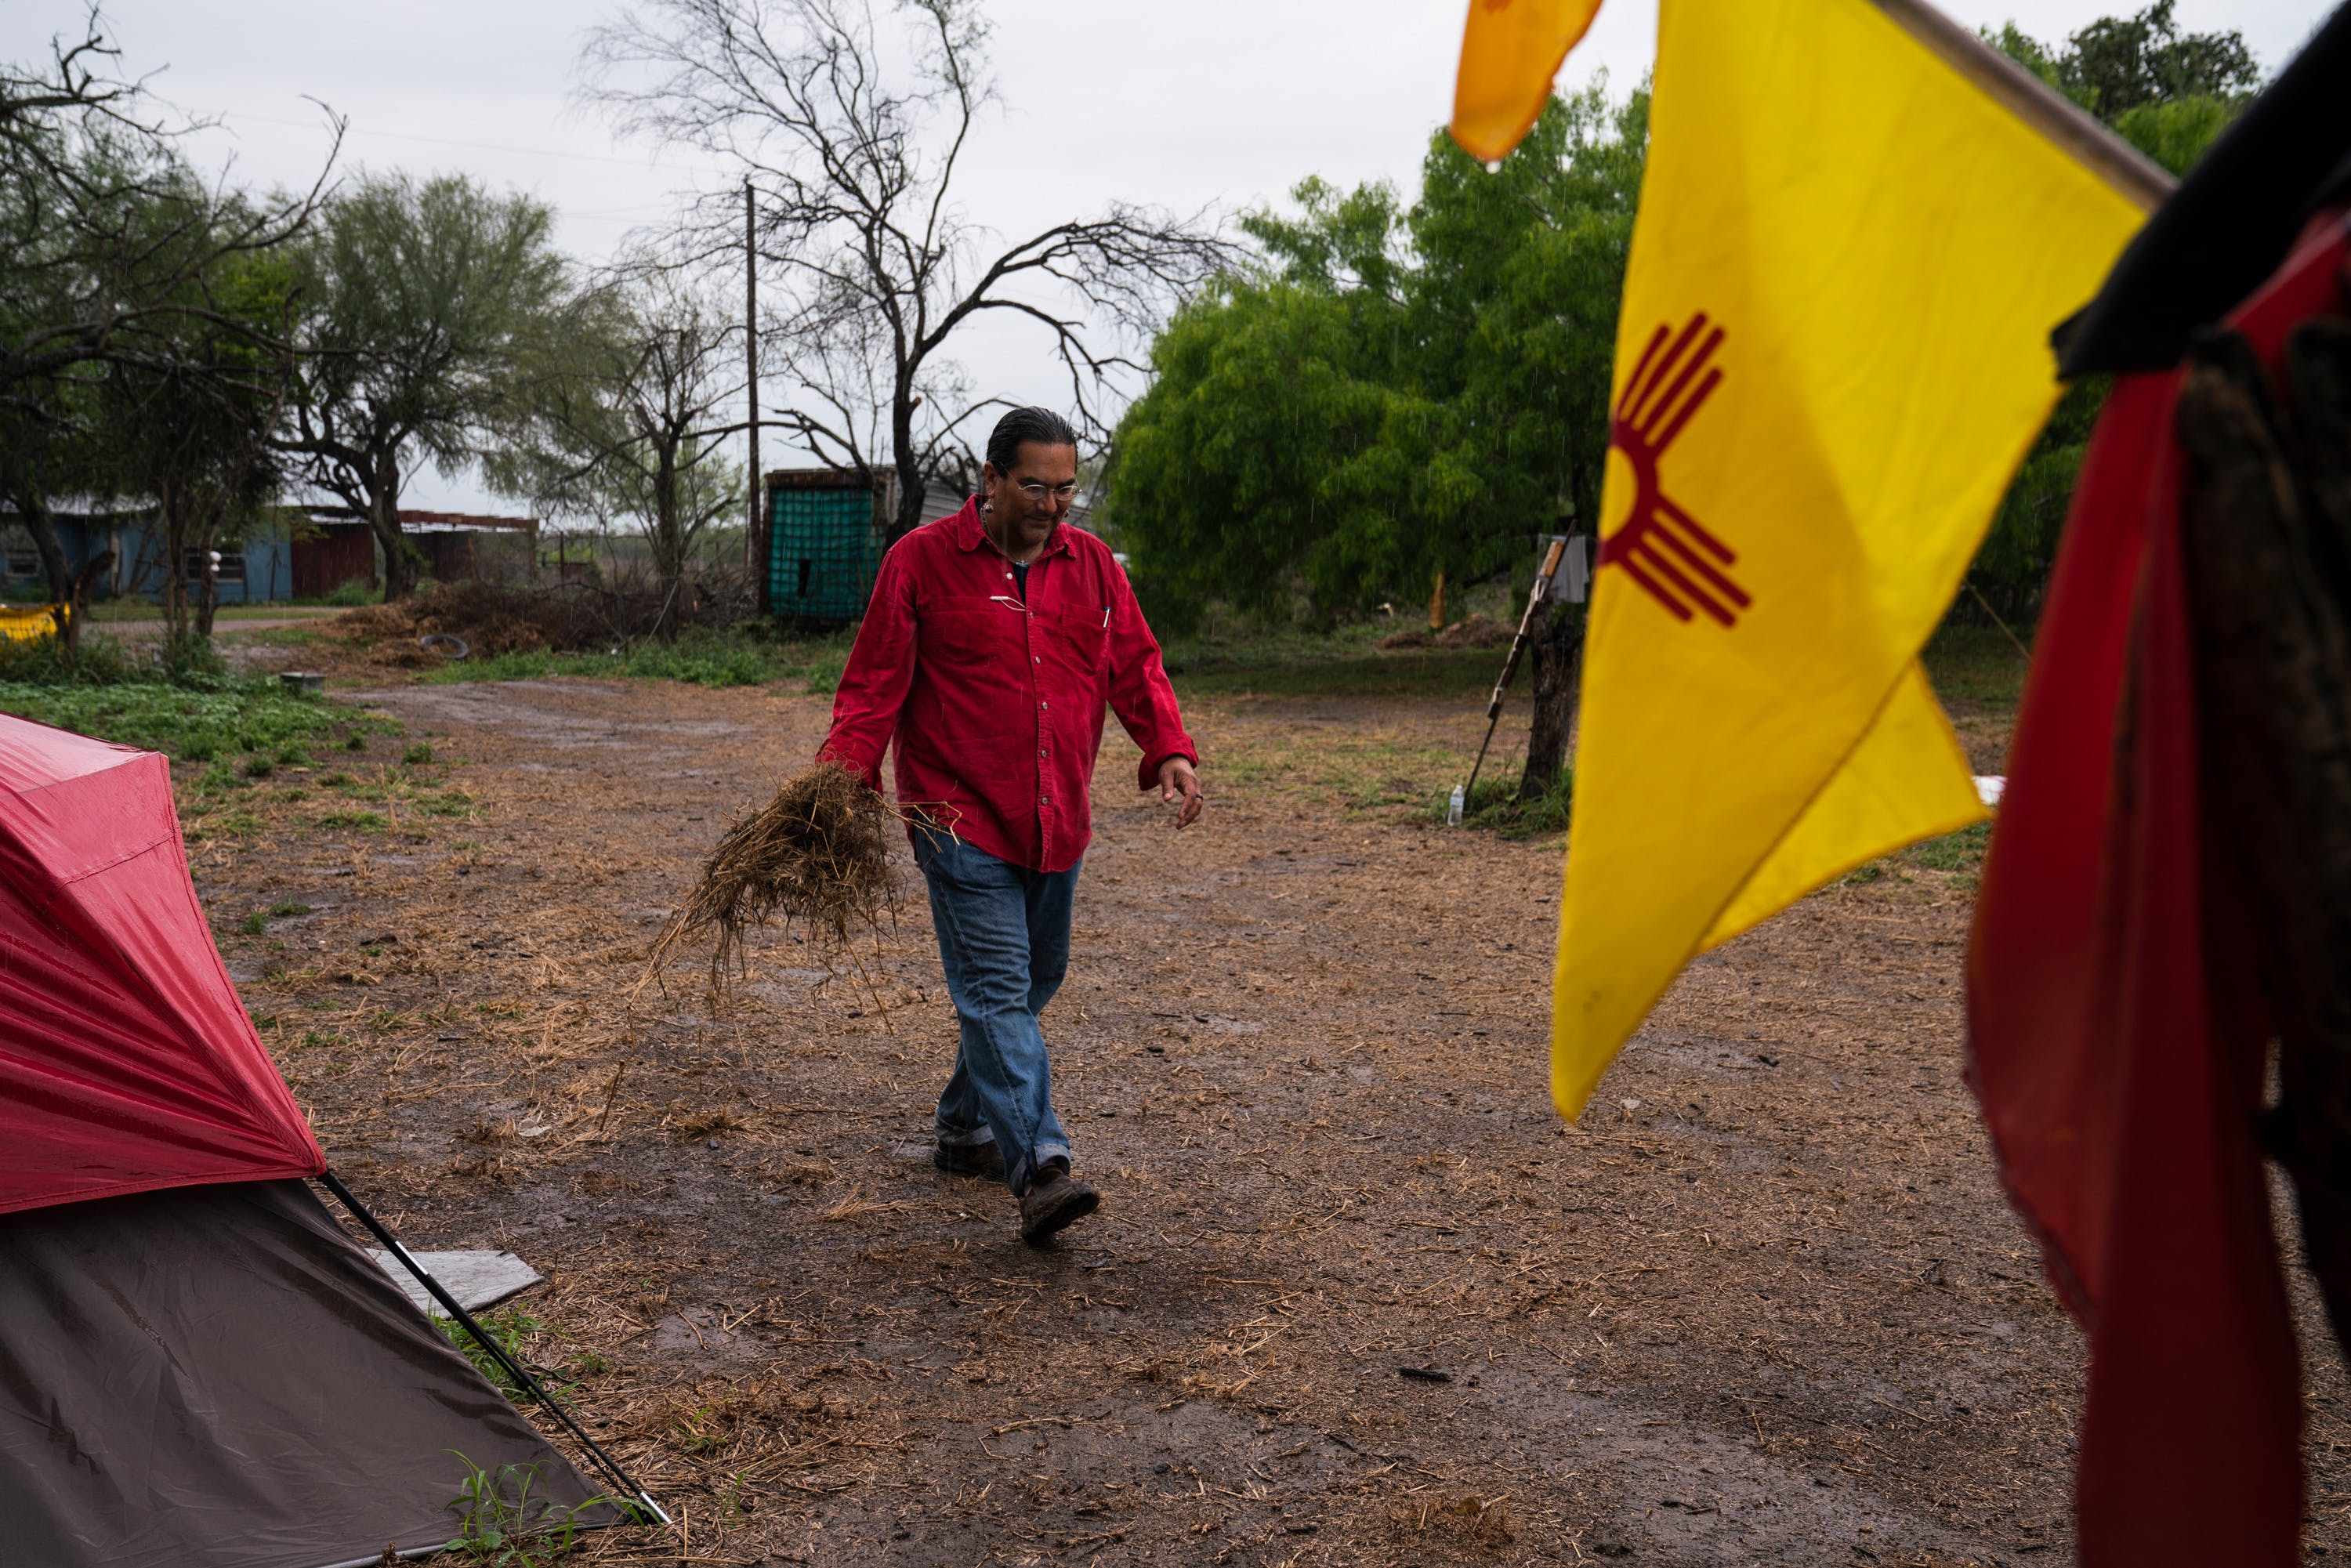 Christopher Basaldú, PhD in anthropology, collects grass to place it outside of his tent to clean up the mud from his shoes at Yalui Village in Hidalgo County, Texas on March 19, 2019. Basaldú has been camping for two months in anticipation of the border wall being built. Photo: Verónica G. Cárdenas for The Intercept